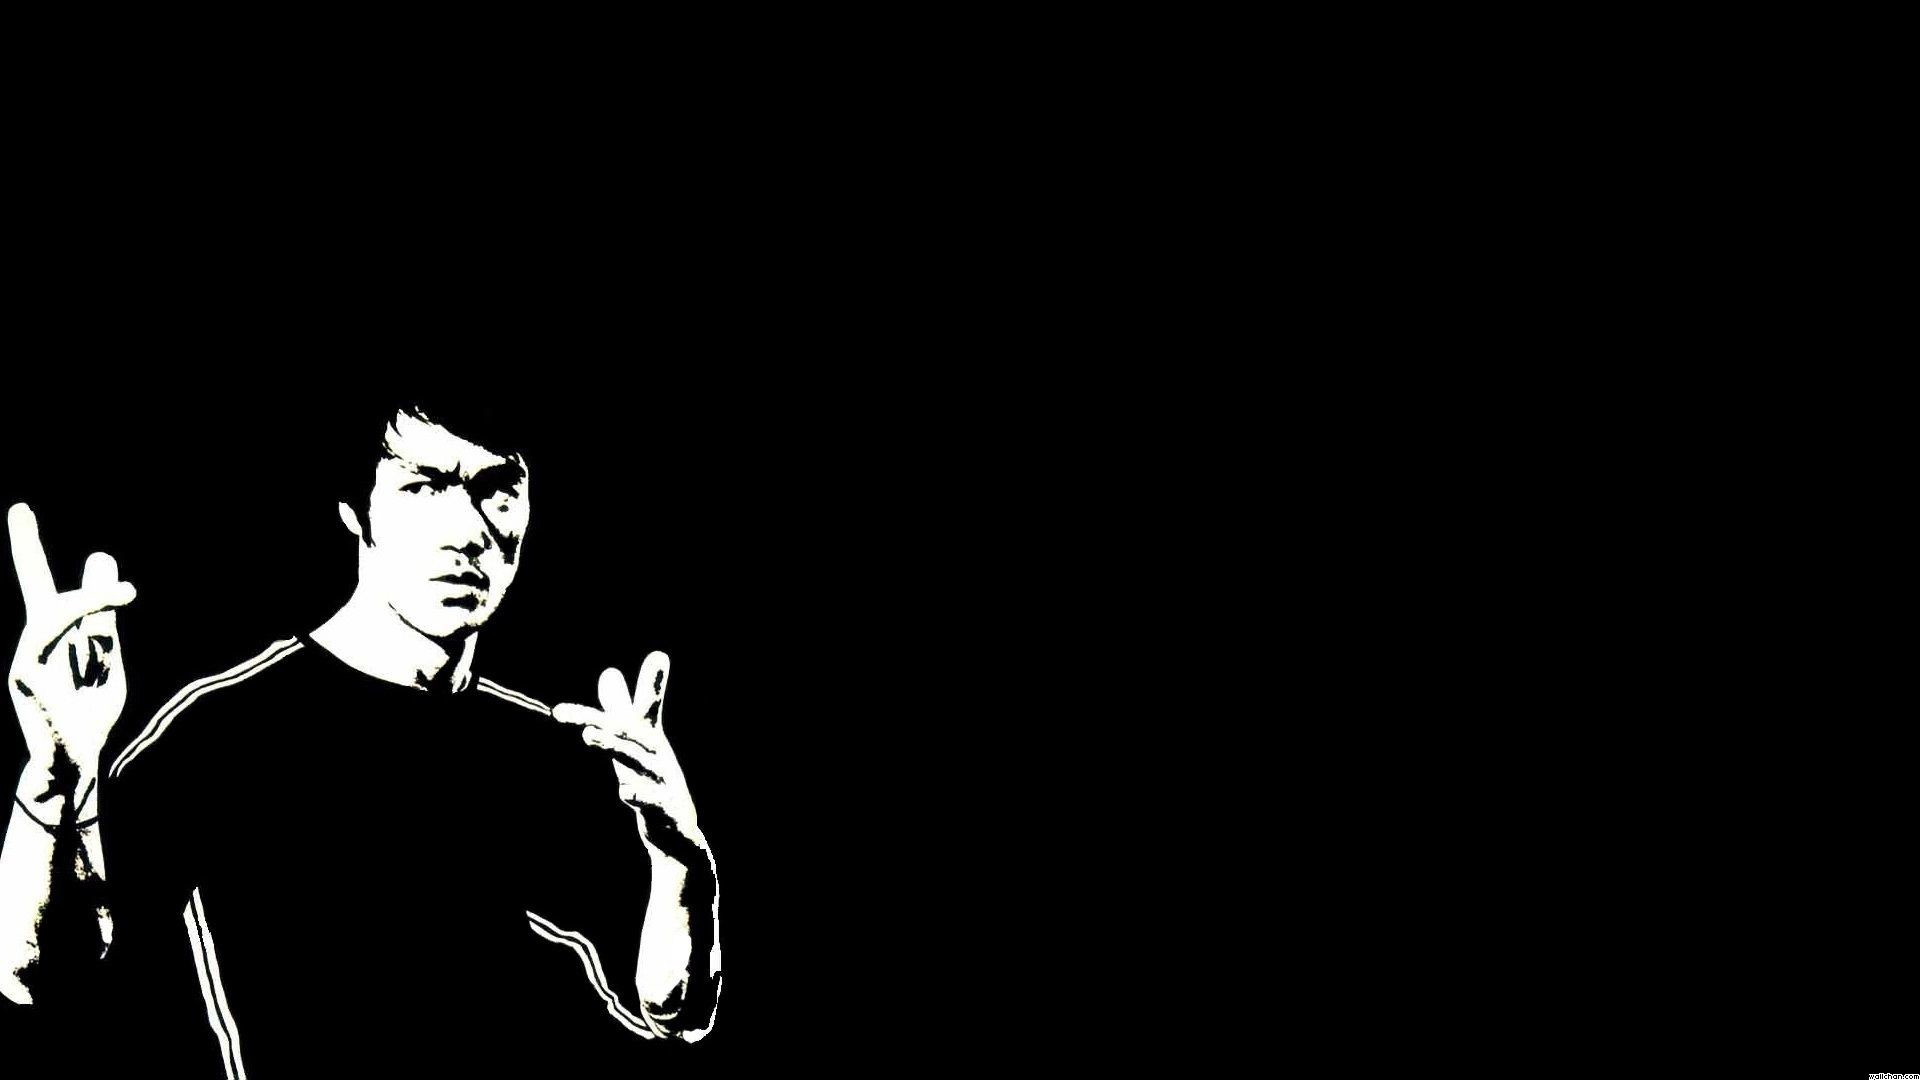 shaolin kung fu wallpaper,black,black and white,microphone,photography,darkness